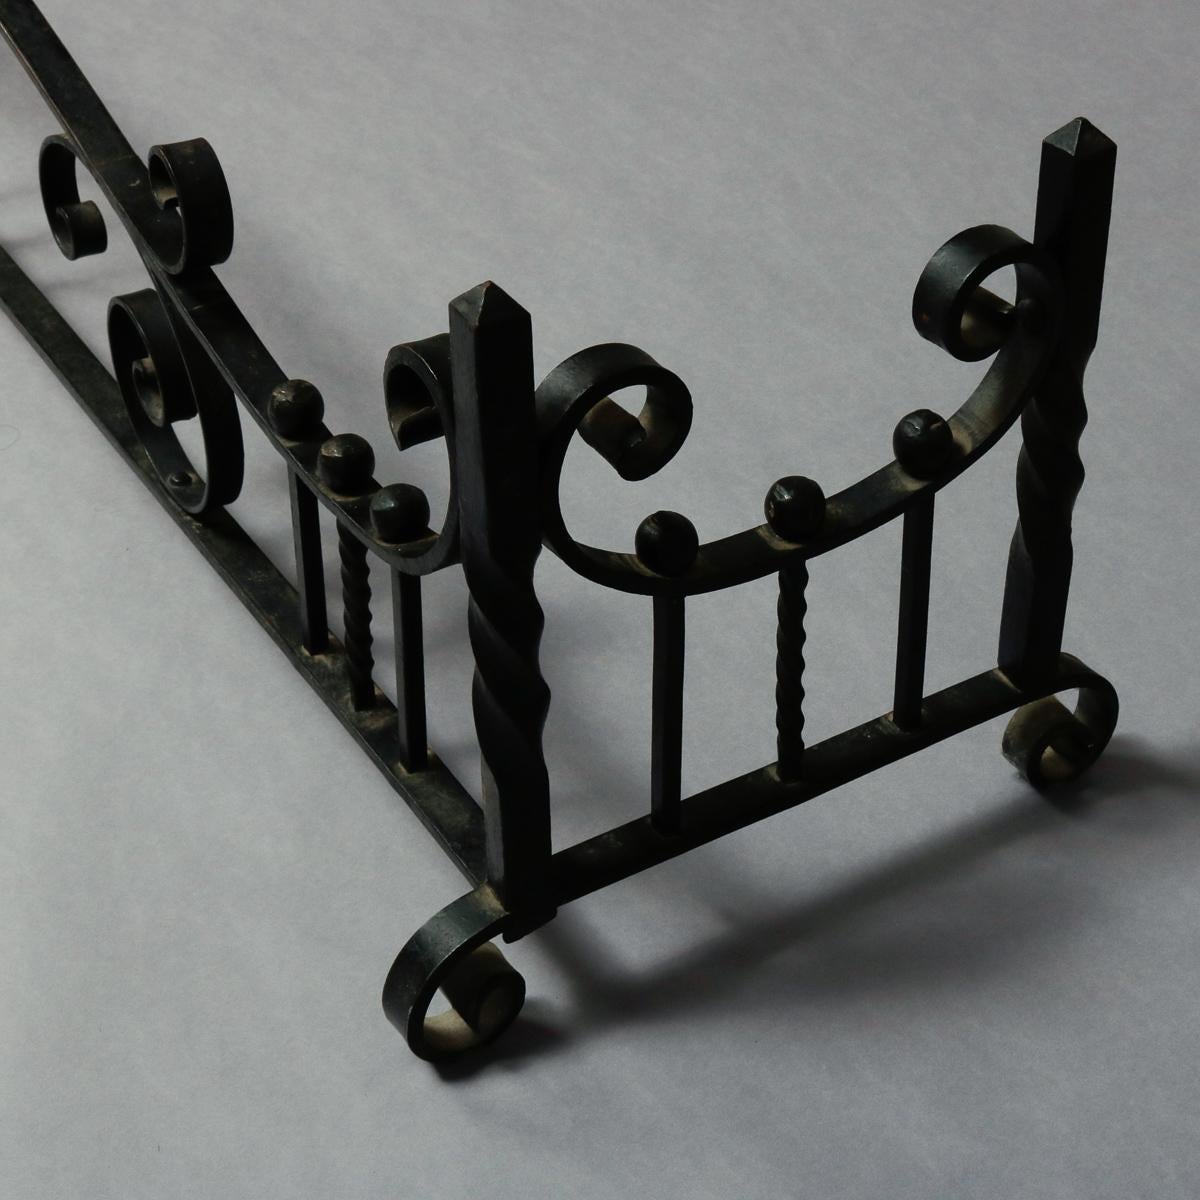 An antique Arts & Crafts Yellin school fireplace fender offers wrought iron construction with scroll and ball and twisted post work, raised on scroll form feet, circa 1910

***DELIVERY NOTICE – Due to COVID-19 we are employing NO-CONTACT PRACTICES